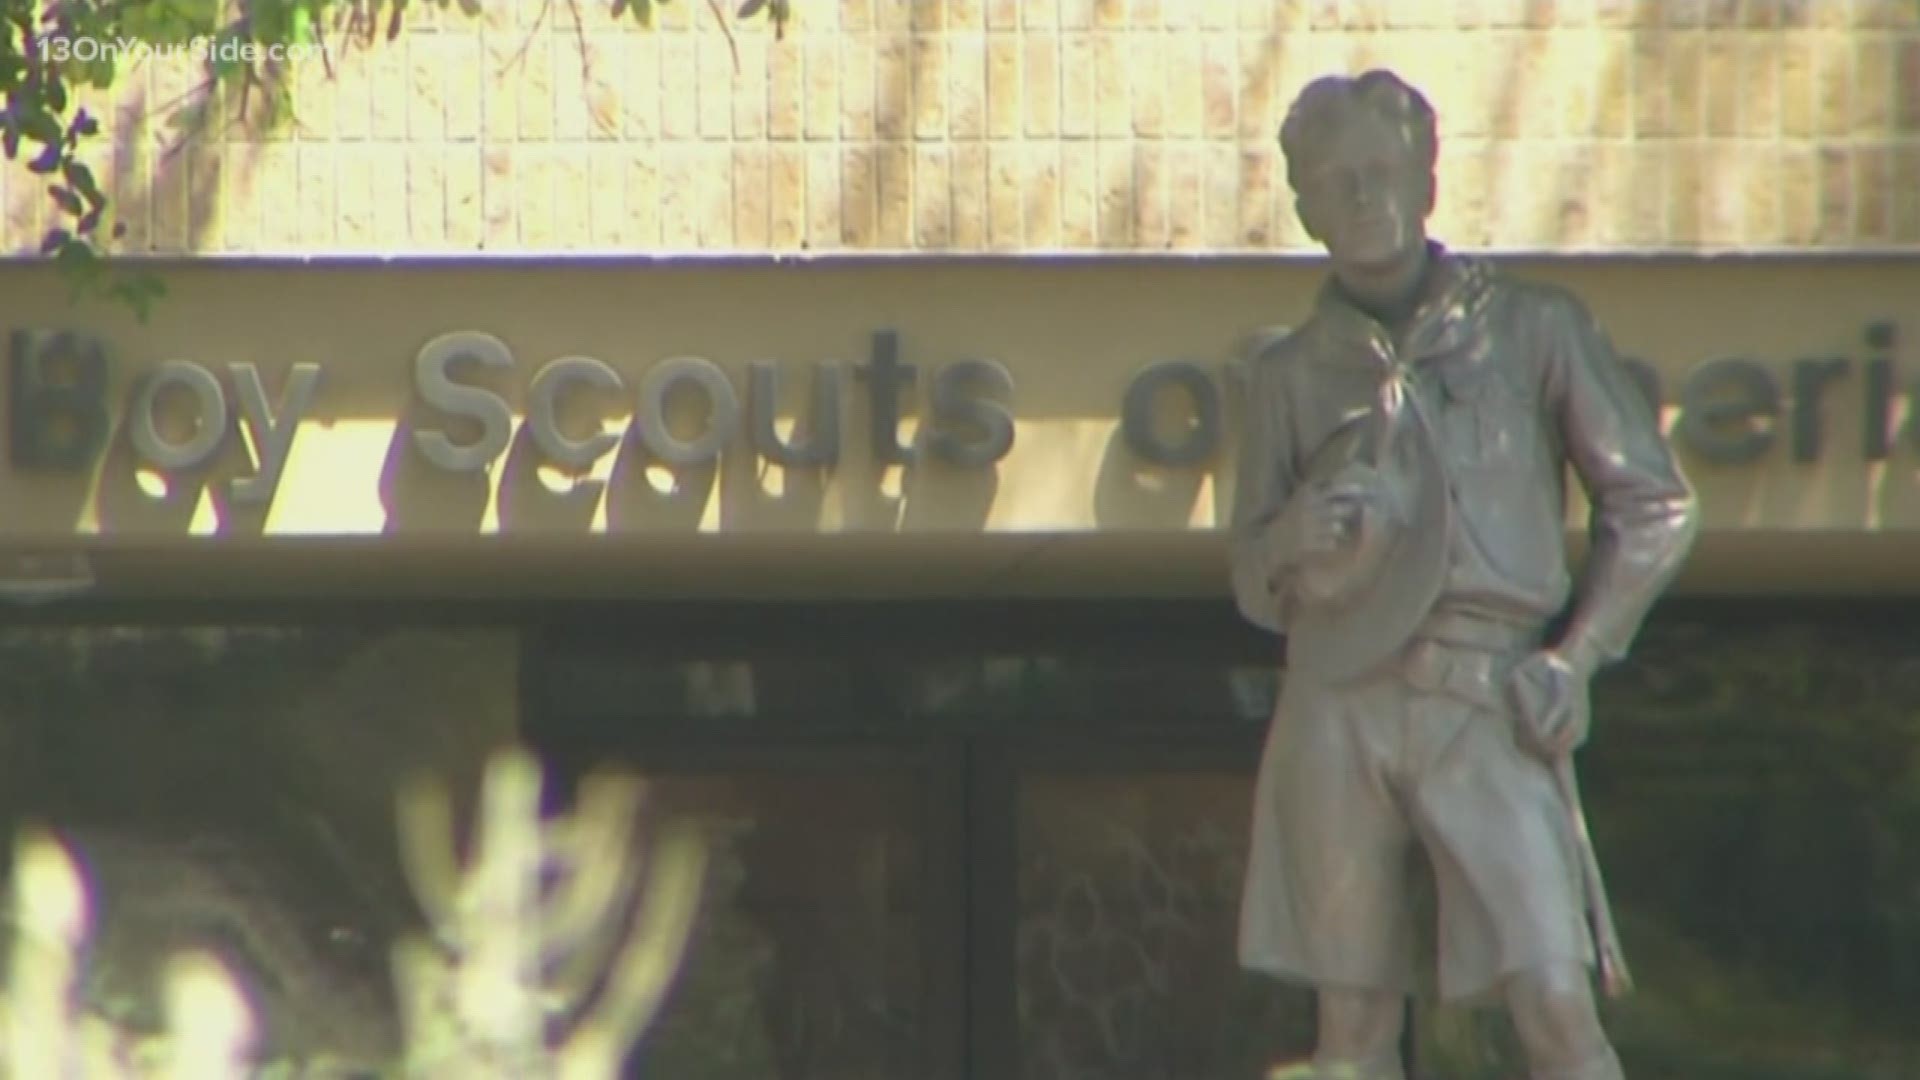 Boy Scouts of America files for bankruptcy protection amid sex abuse lawsuits. 13 ON YOUR SIDE sought out local chapter to see how they were impacted.